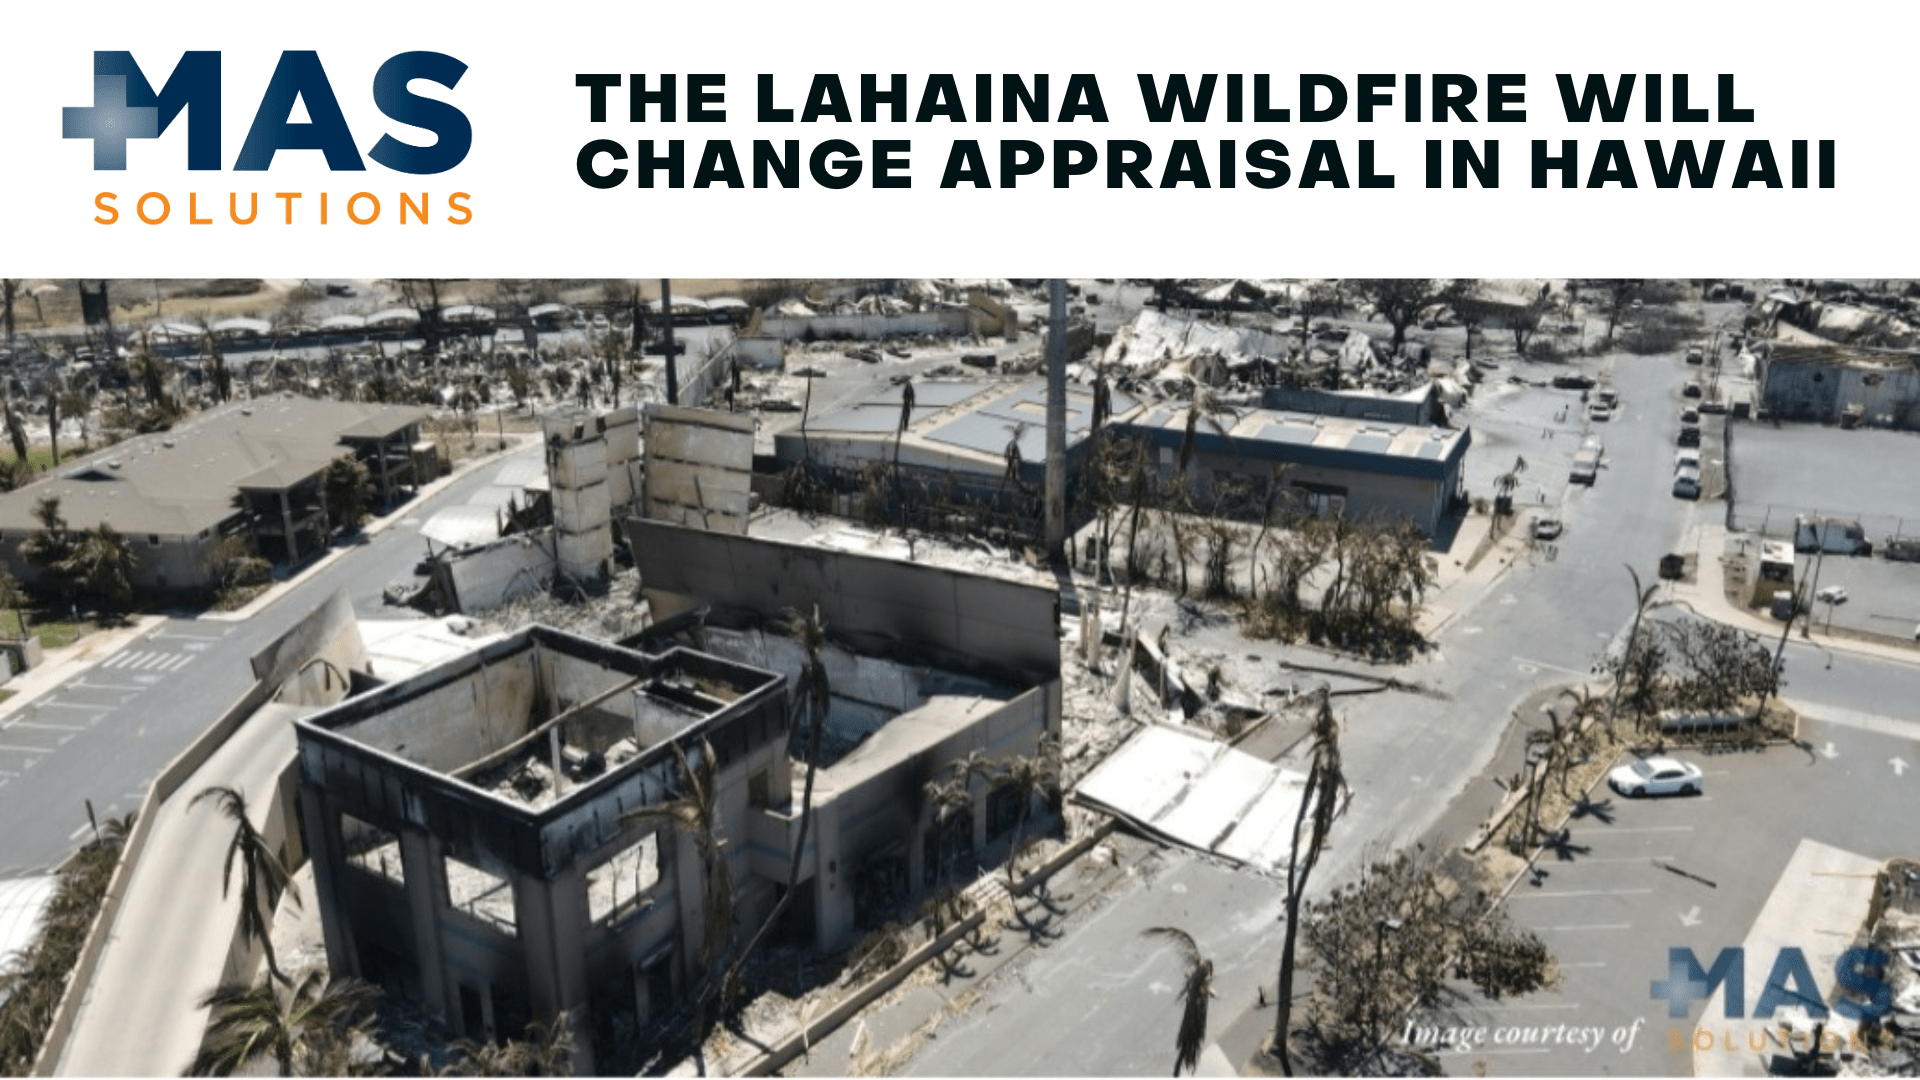 The Lahaina Wildfire Will Change Appraisal In Hawaii